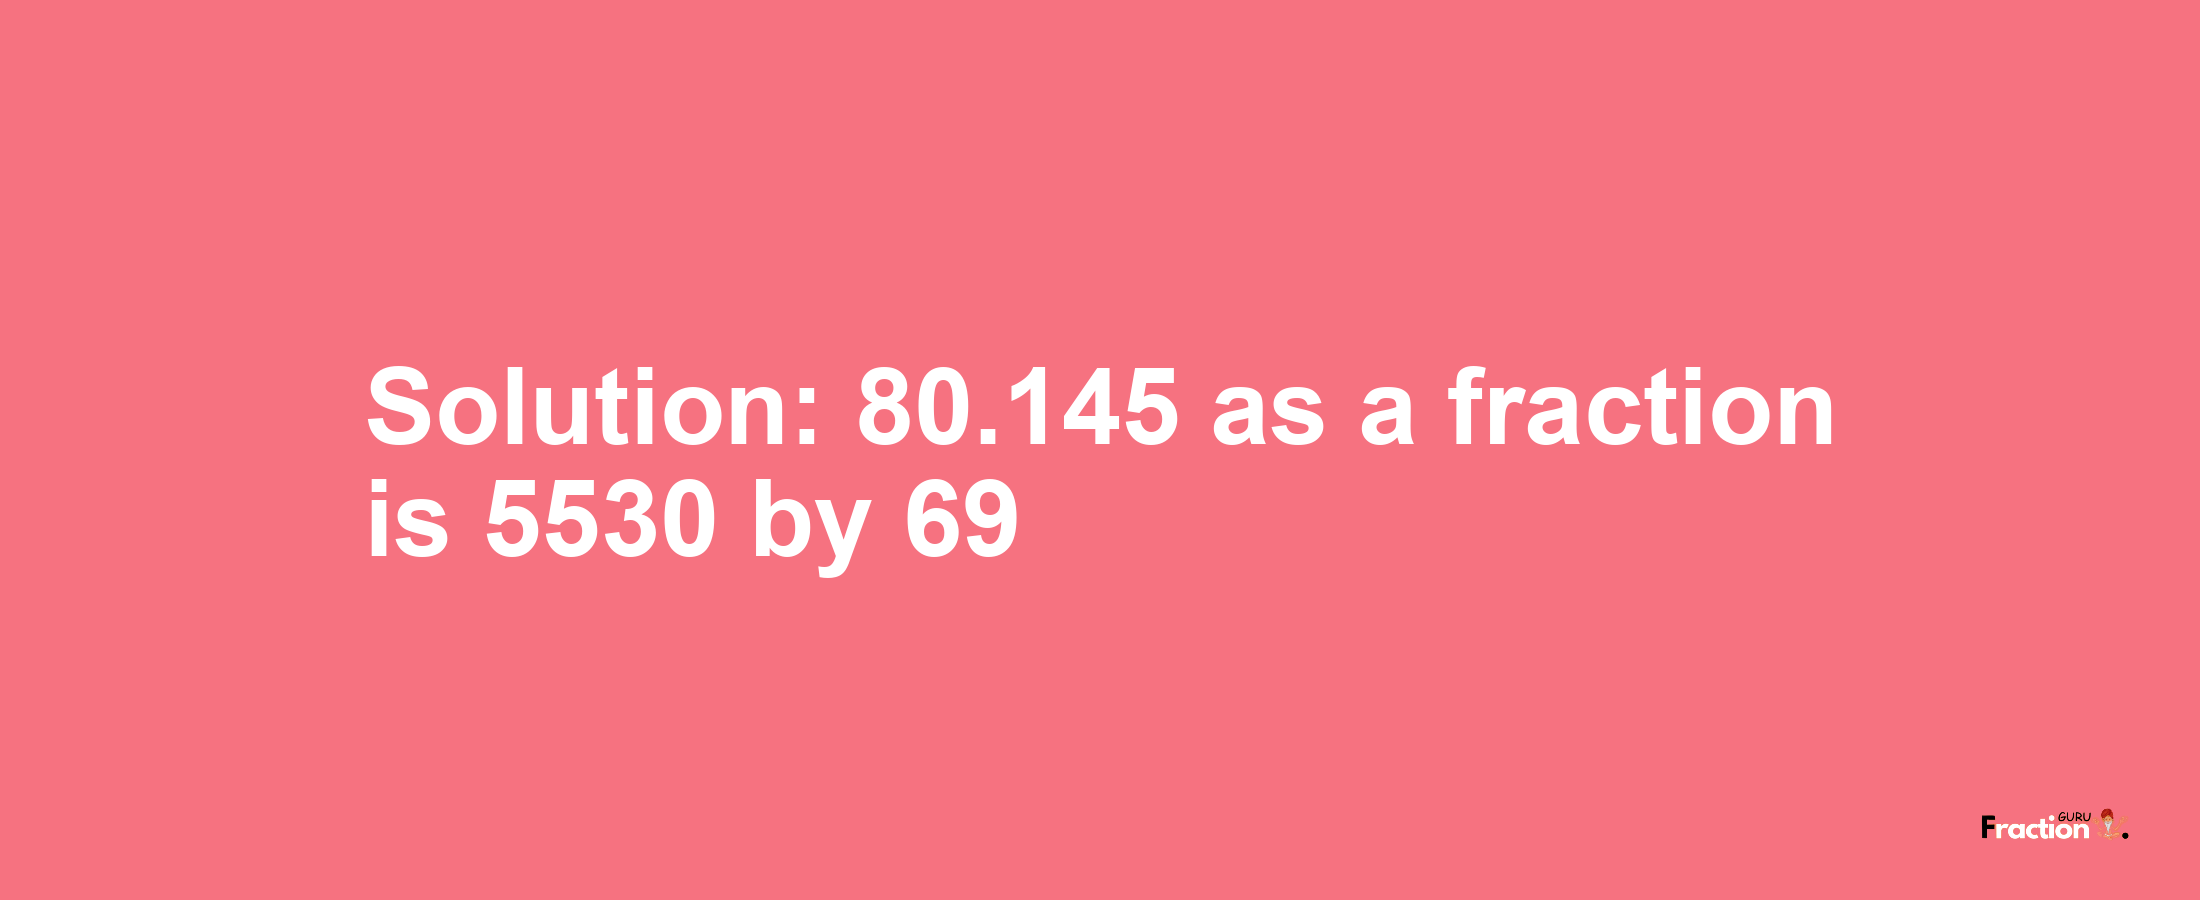 Solution:80.145 as a fraction is 5530/69